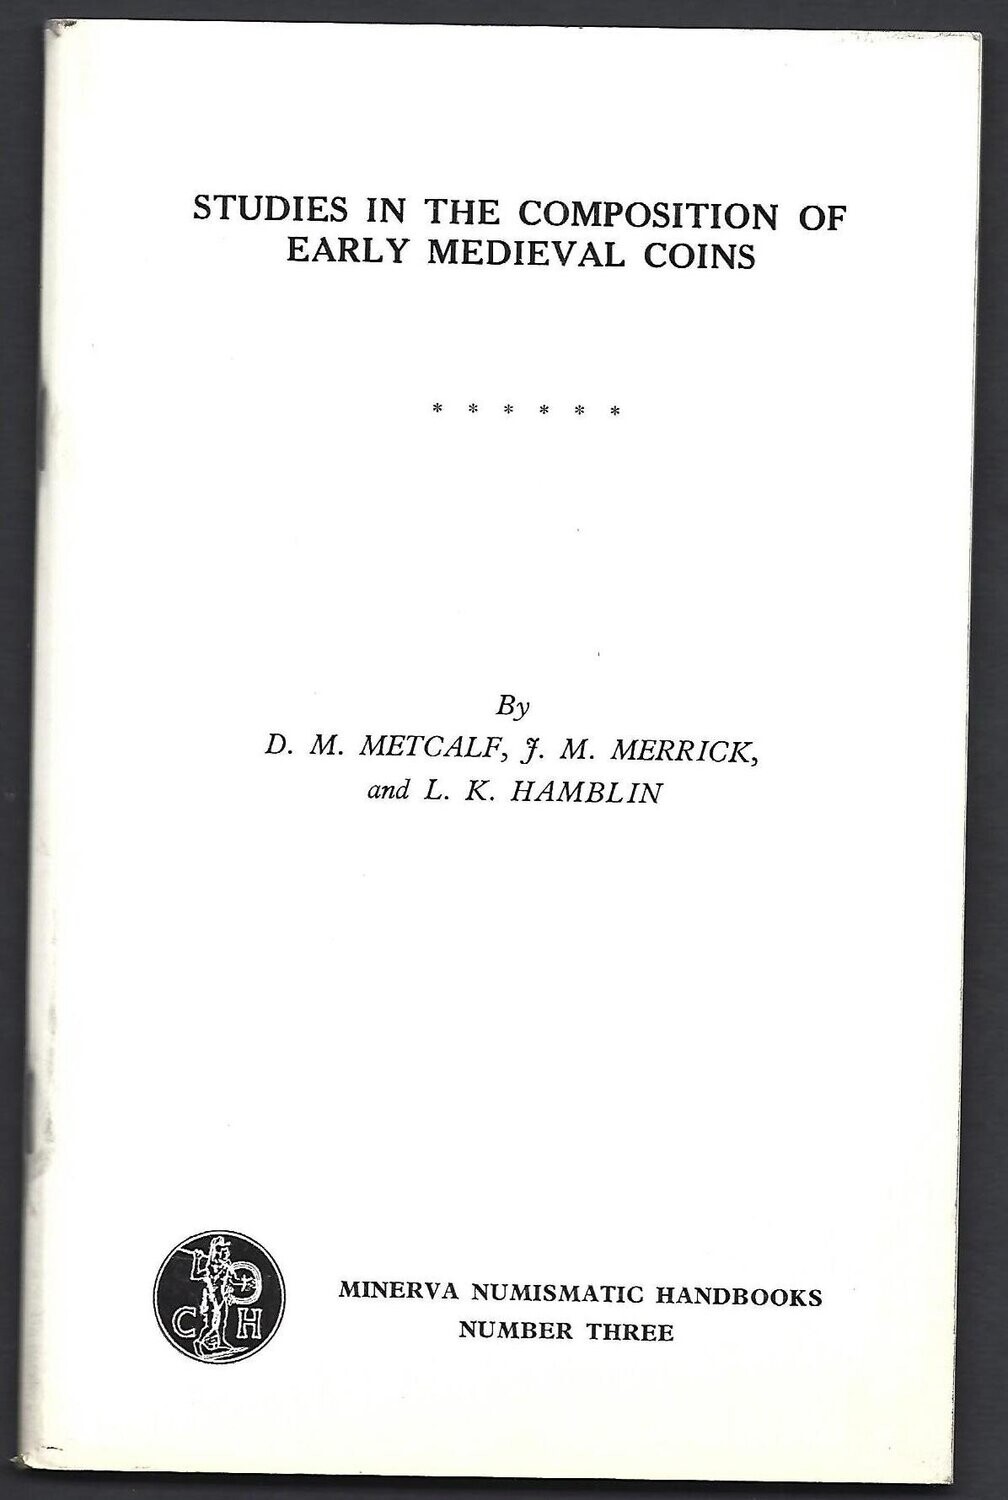 Medieval; D. M. Metcalf, et al., "Studies in the Composition of Early Medieval Coins."